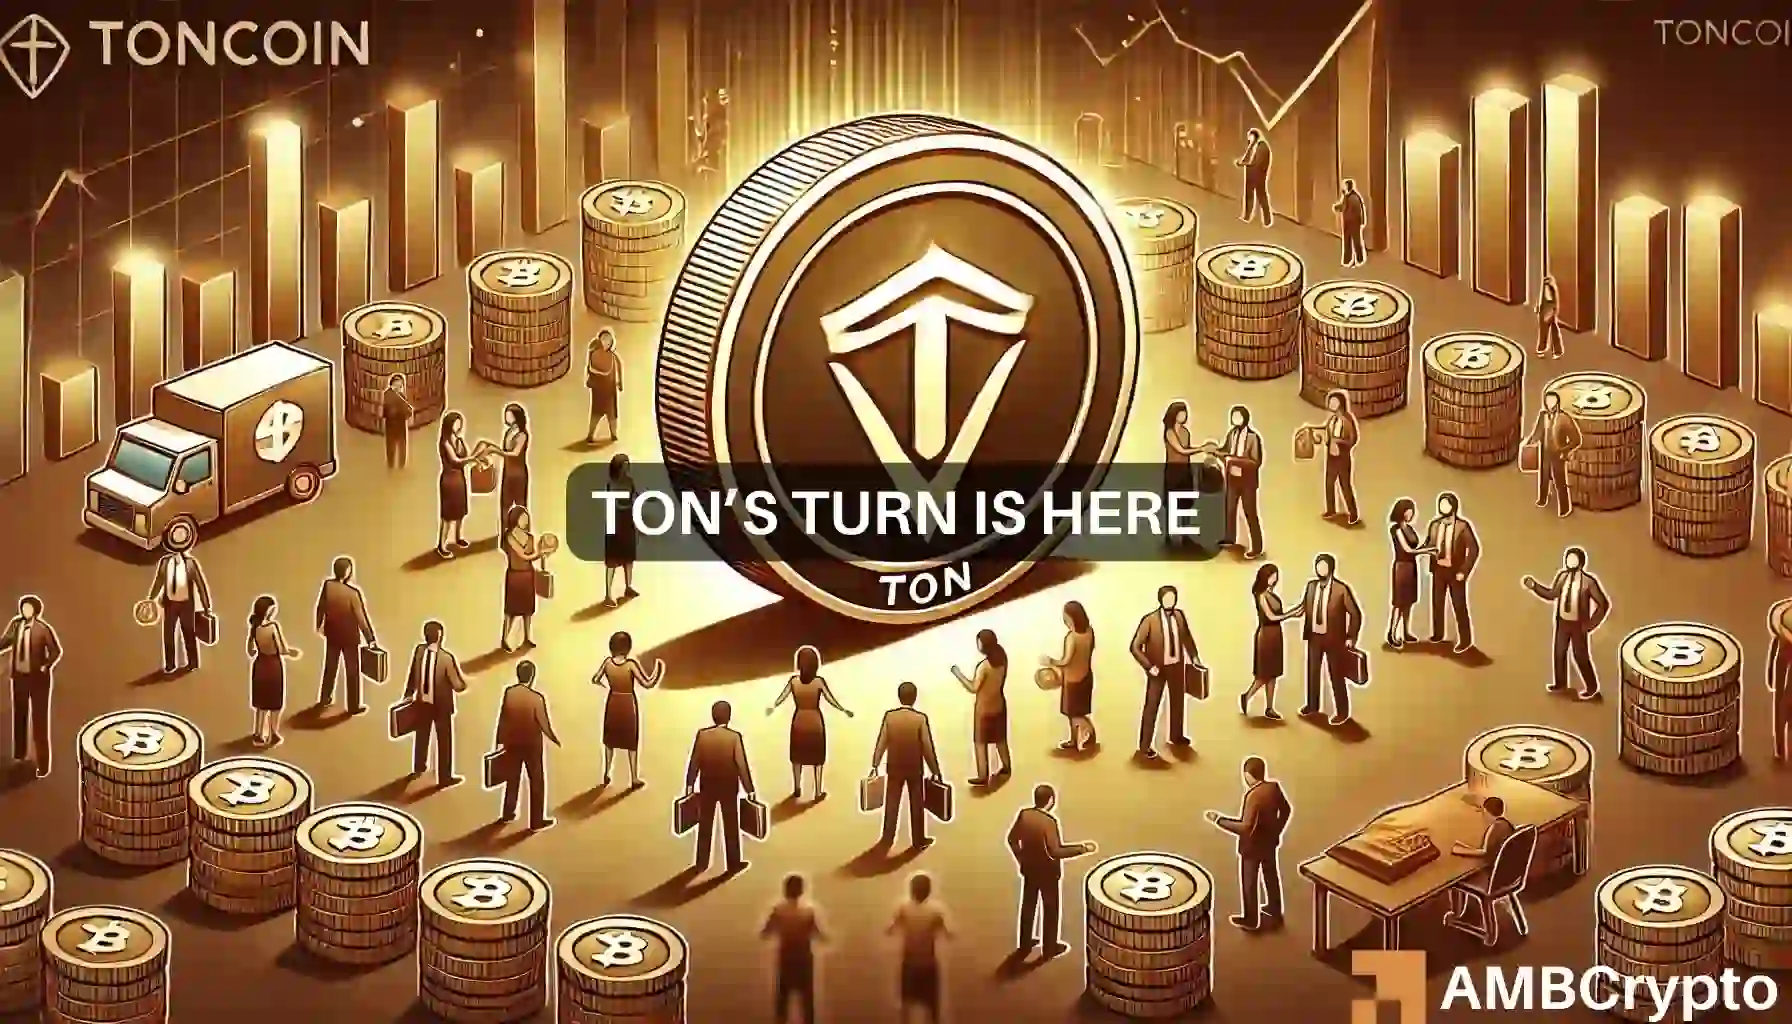 Why Toncoin may soon place 100% of TON holders in profits